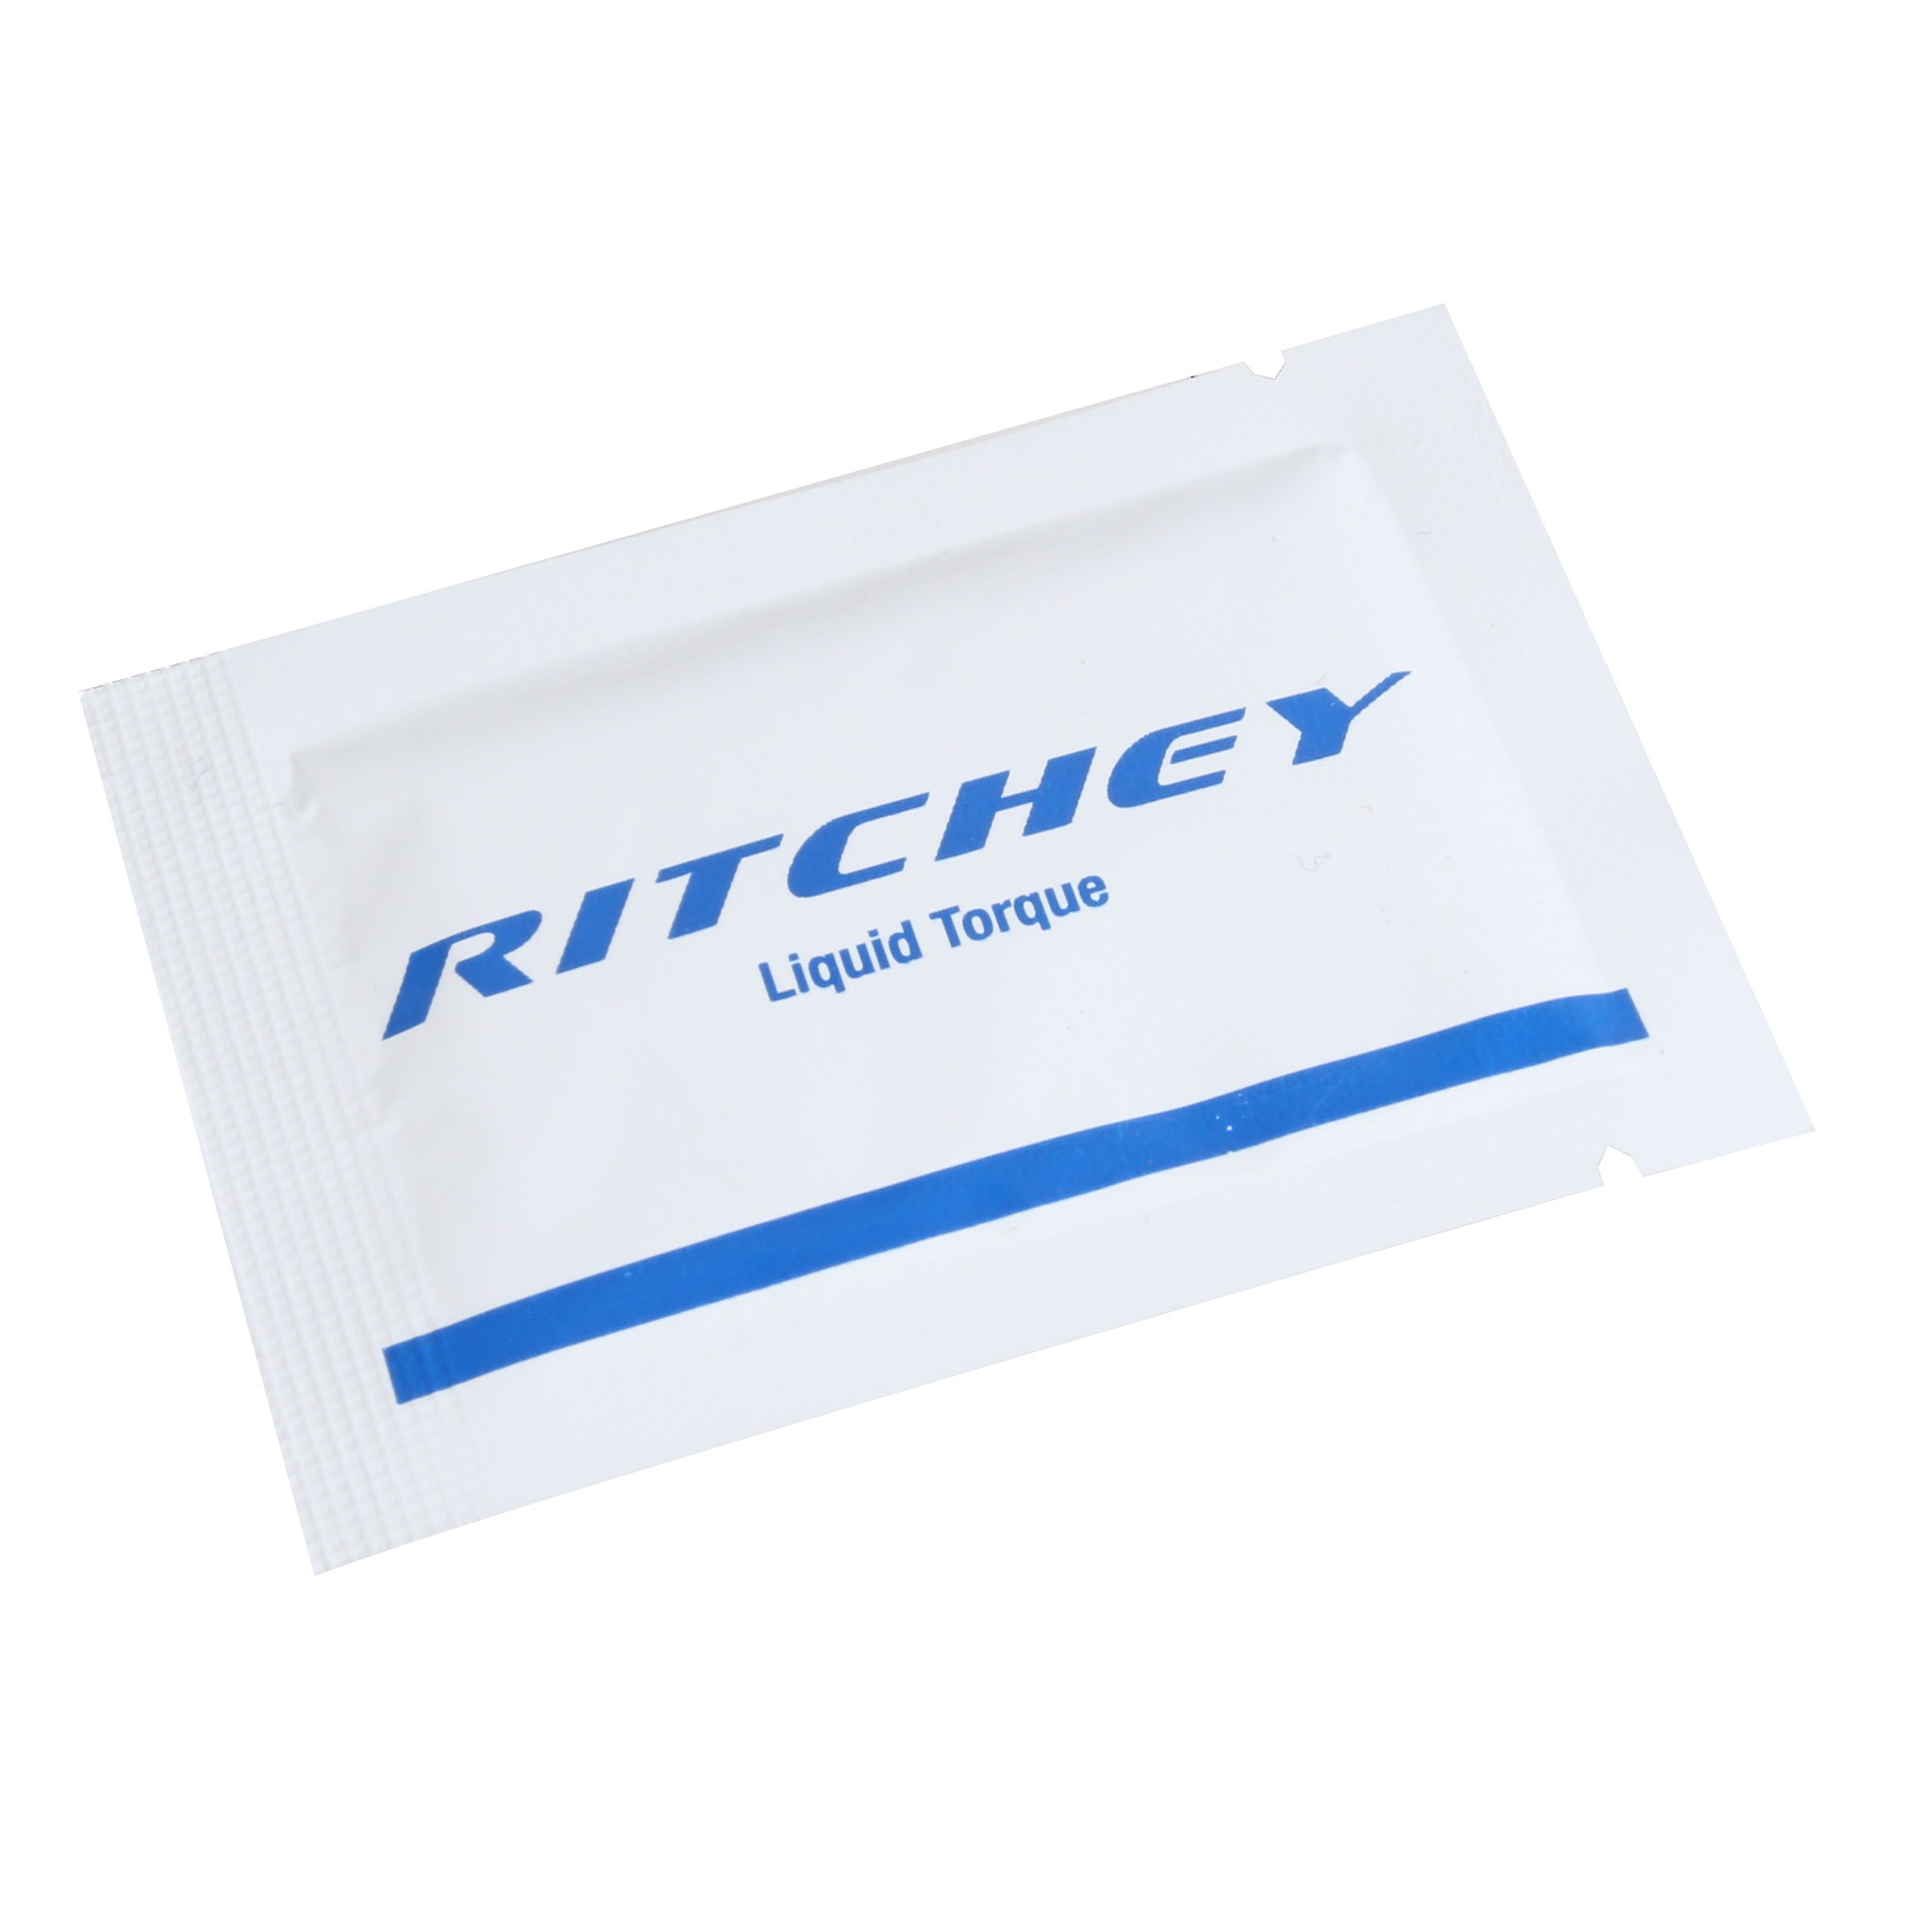 Ritchey Liquid Torque Carbon Assembly Compound, 5g/Pack